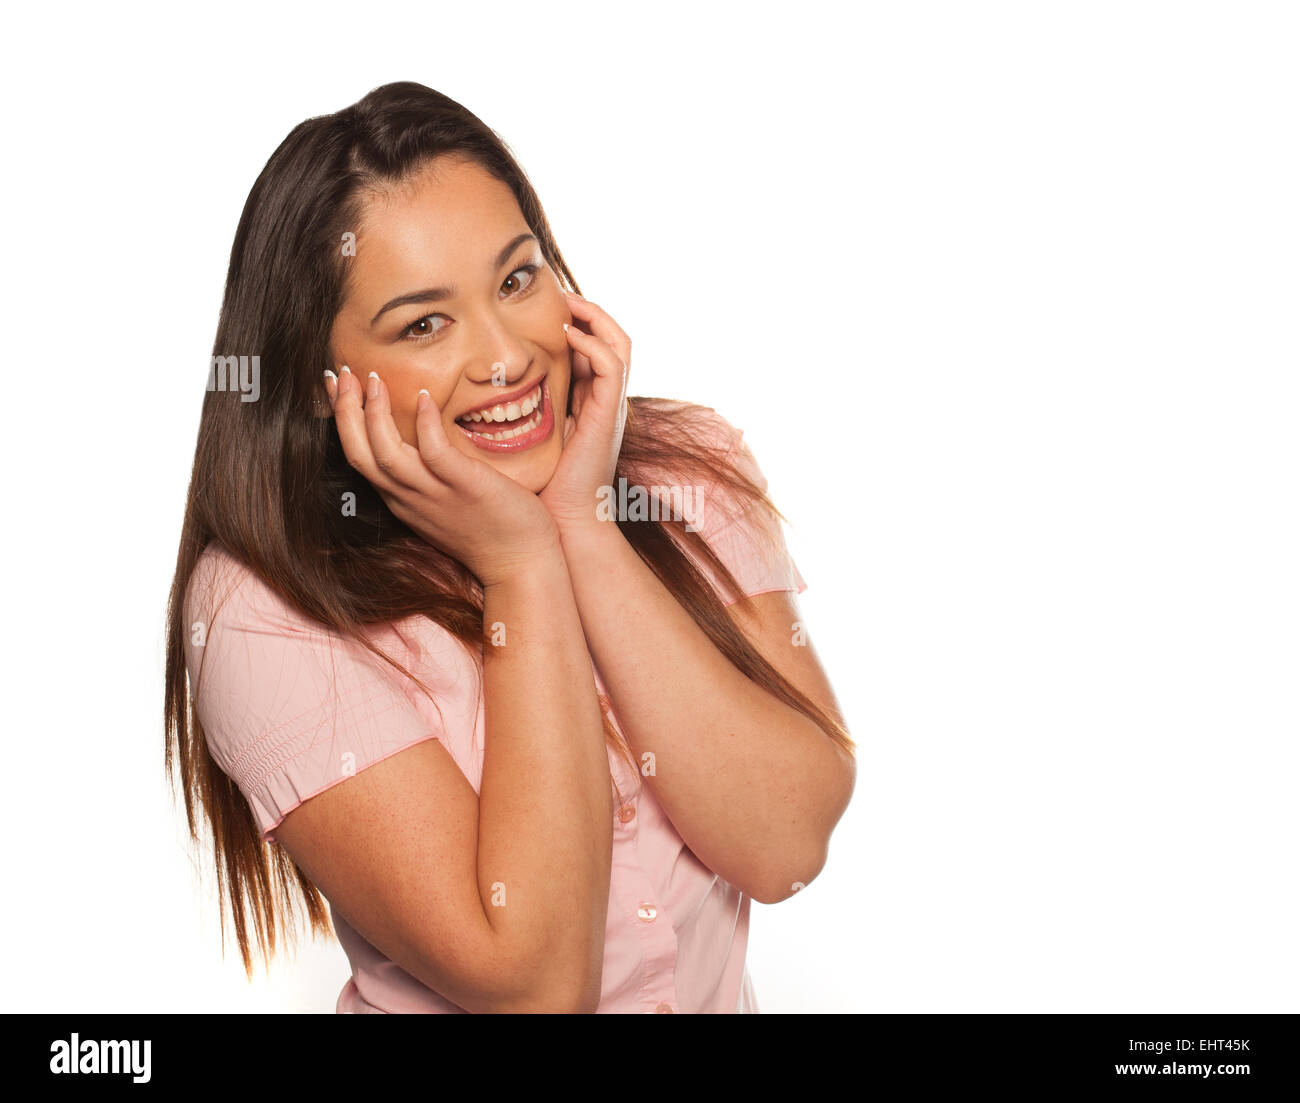 Happy young woman expressing surprise Stock Photo